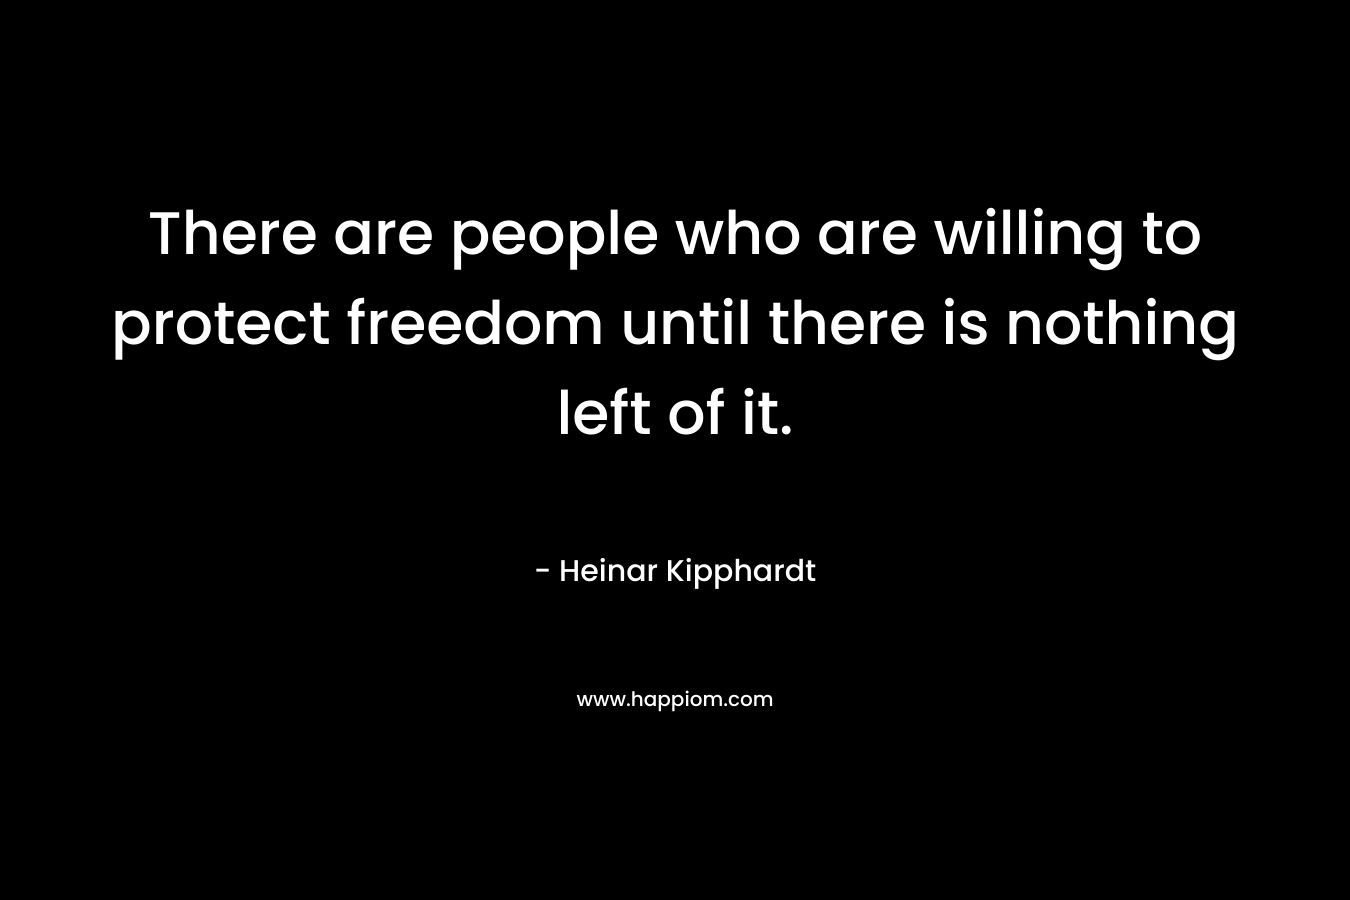 There are people who are willing to protect freedom until there is nothing left of it.